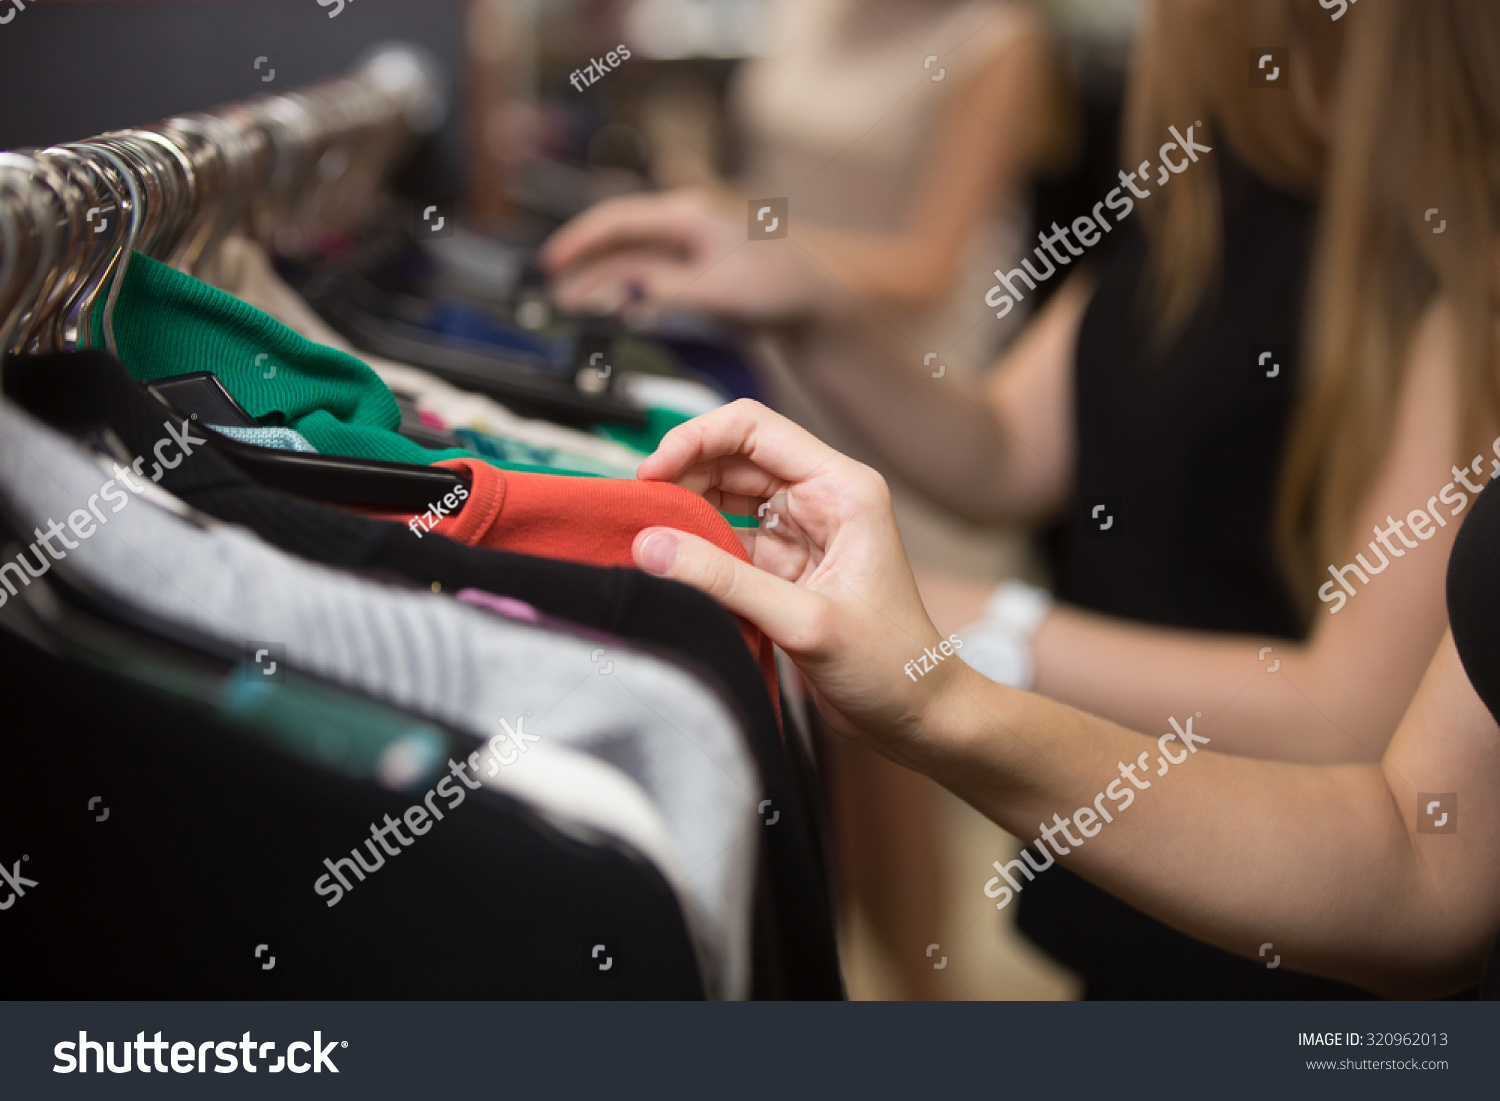 Young beautiful women shopping in fashion mall, choosing new clothes, looking through hangers with different casual colorful garments on hangers, close up of hands #320962013